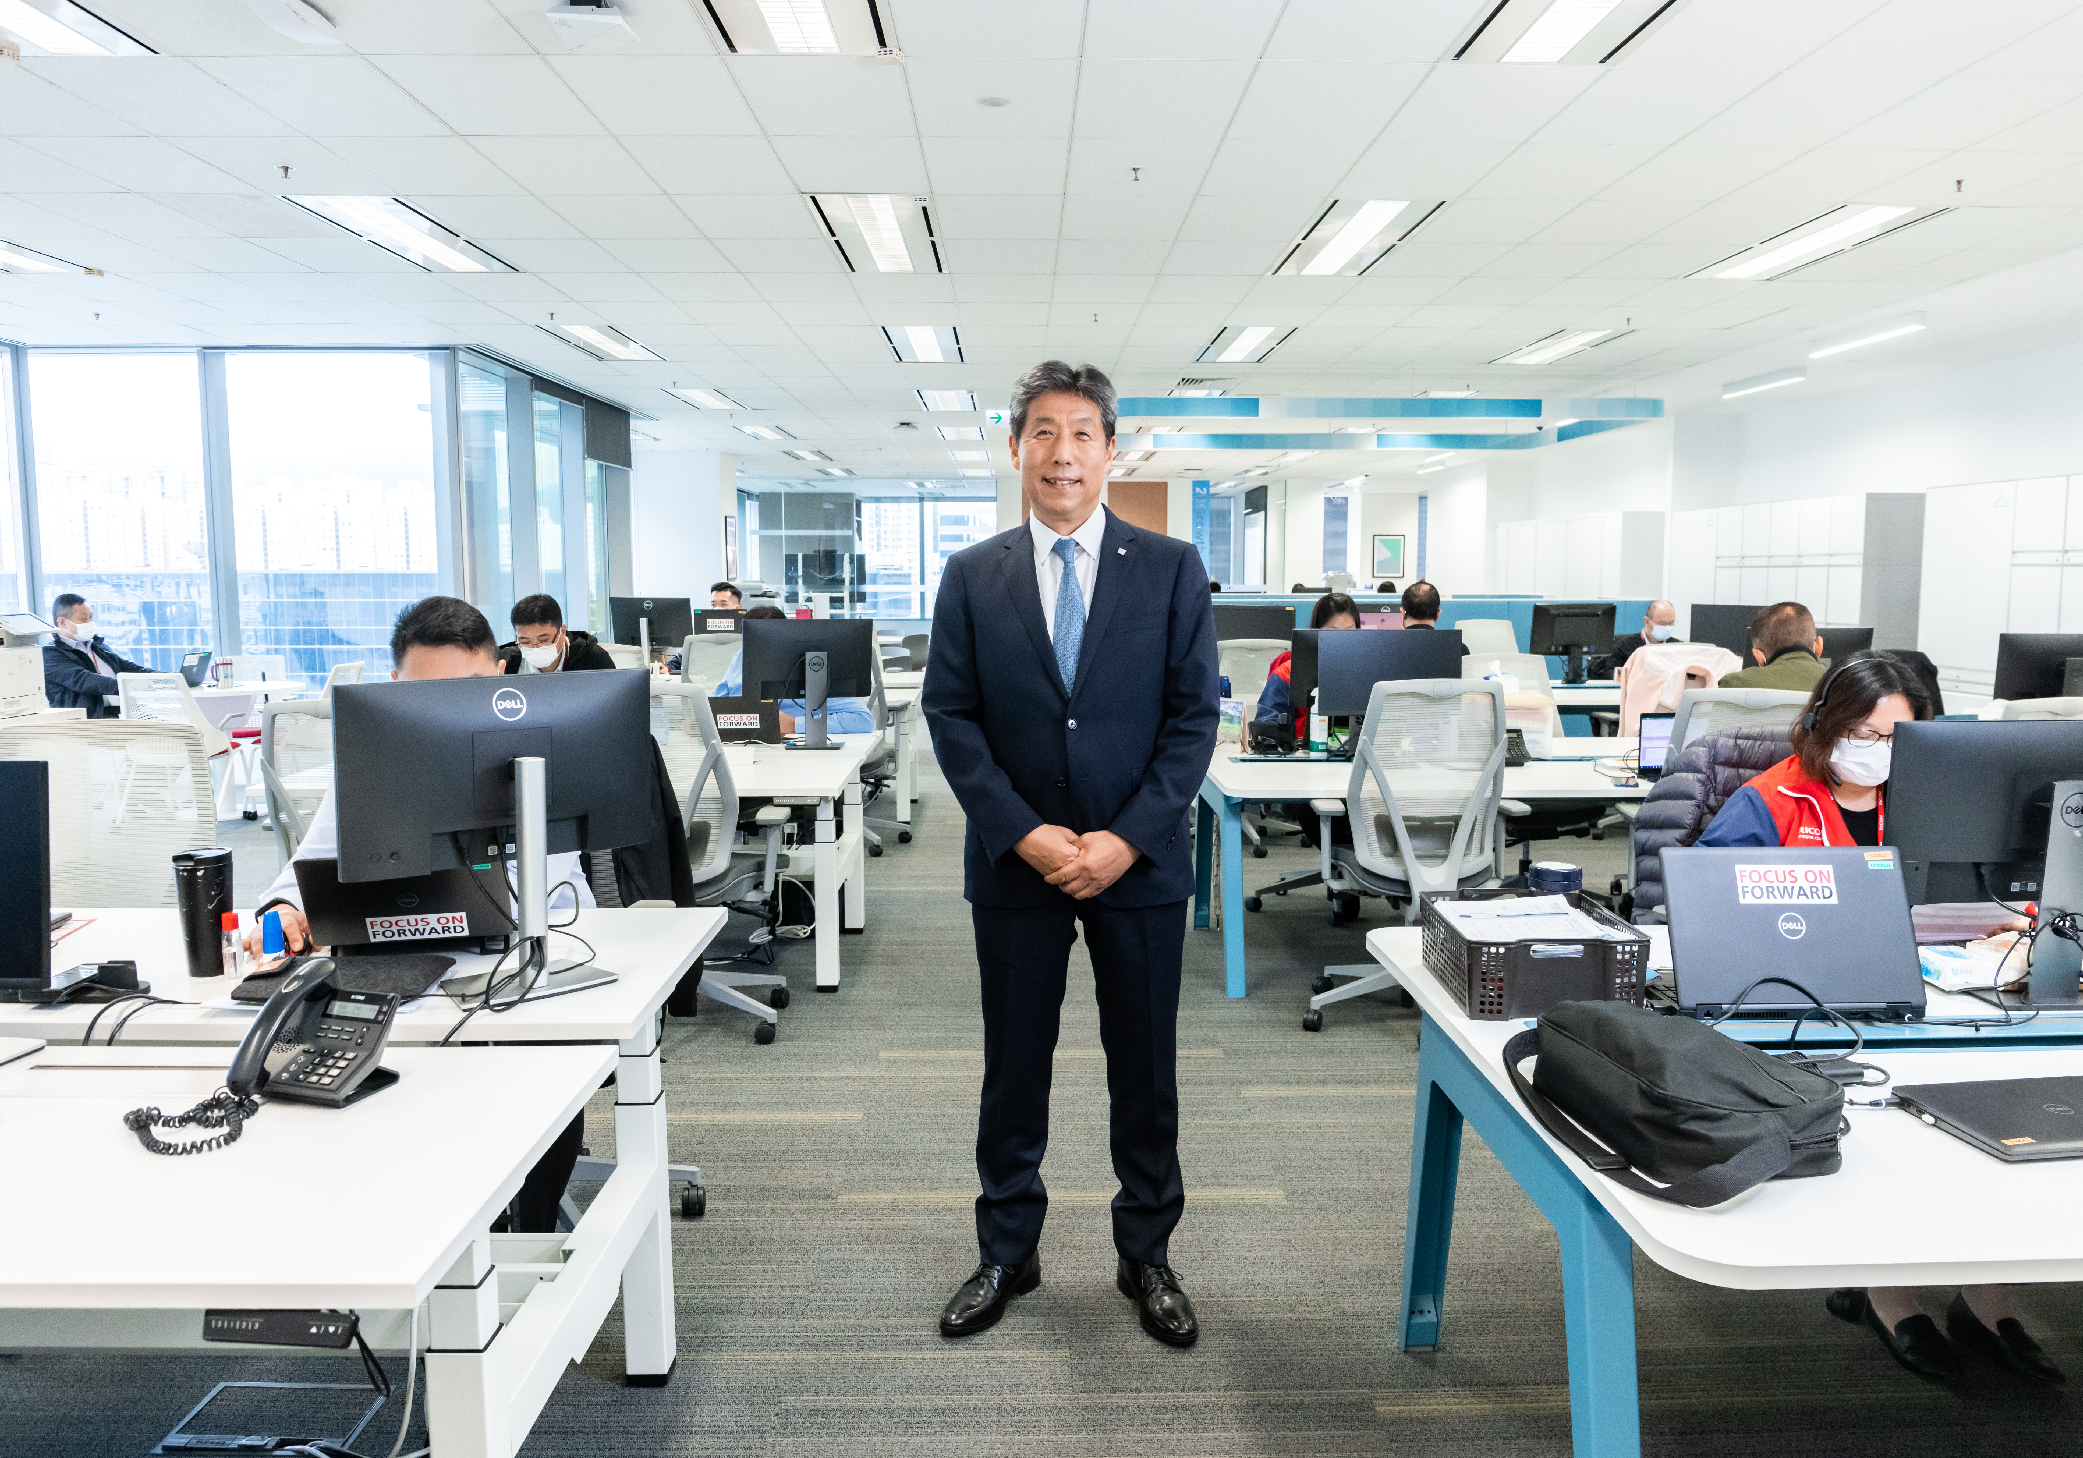 Joji Tokunaga led Ricoh to focus on four key areas of expertise to help customers transform their businesses and thrive